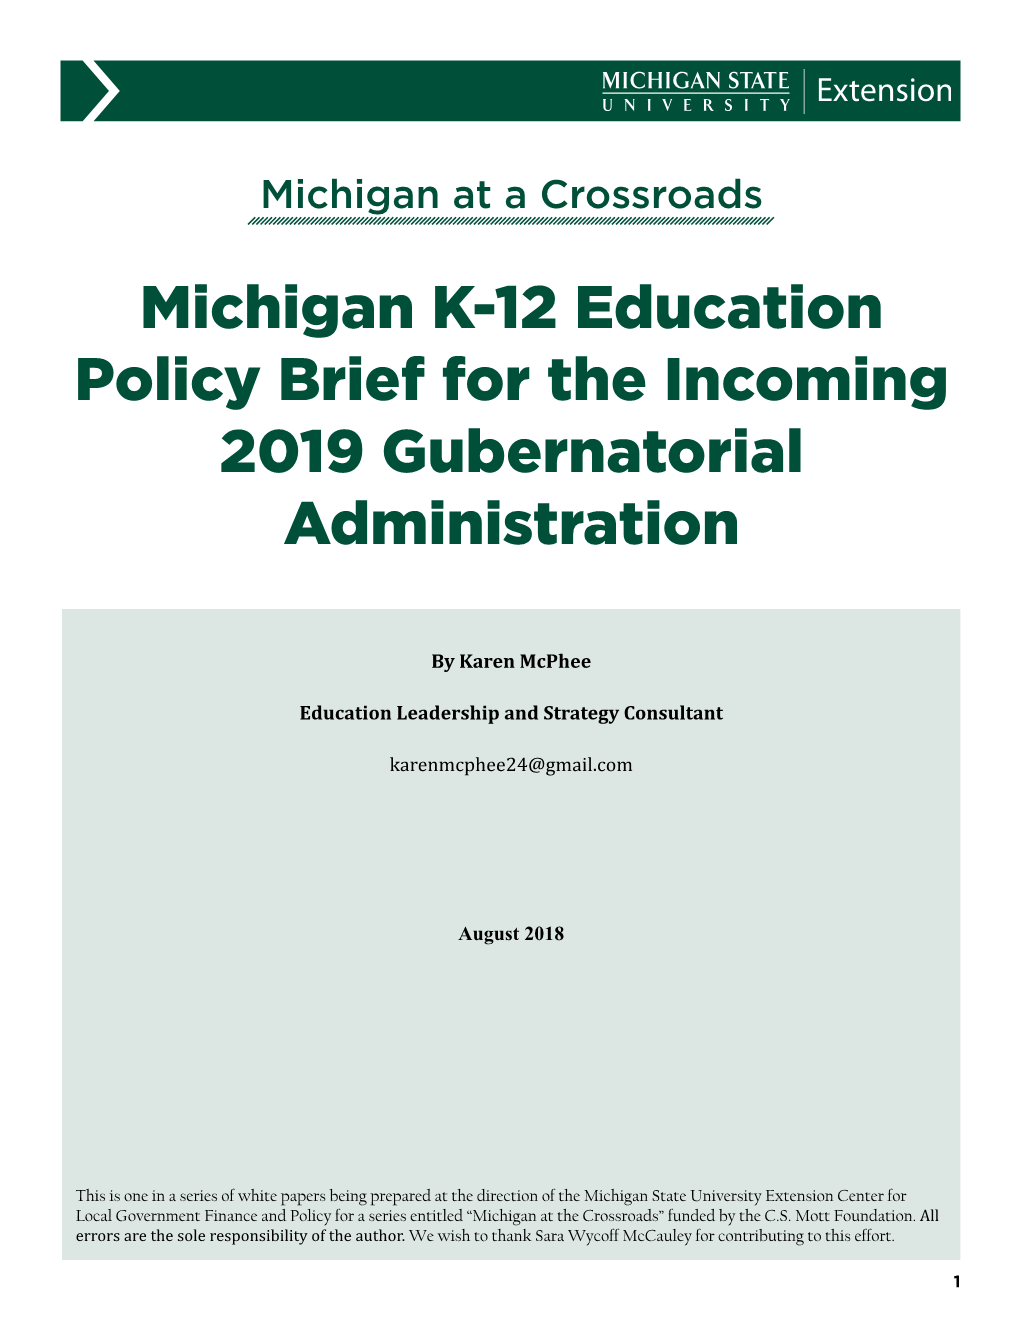 Michigan K-12 Education Policy Brief for the Incoming 2019 Gubernatorial Administration